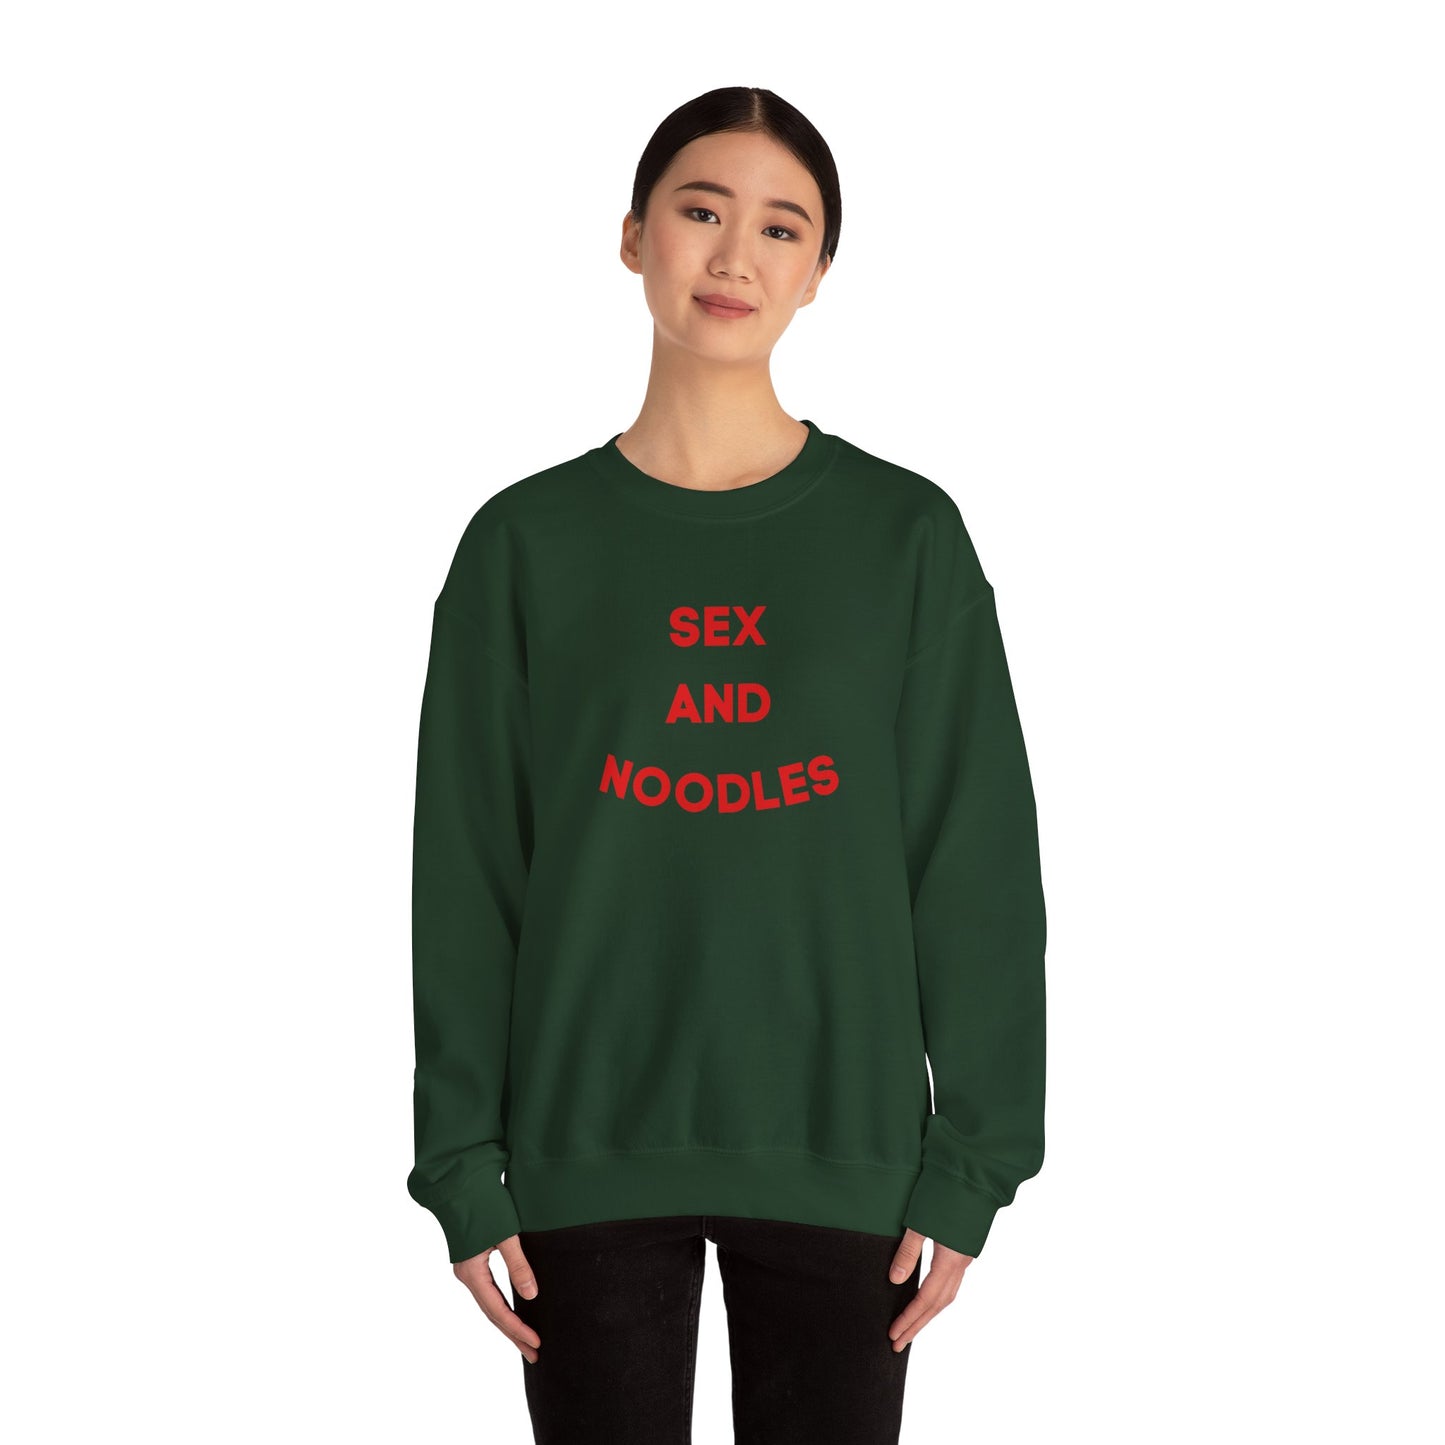 SEX AND NOODLES SWEATER